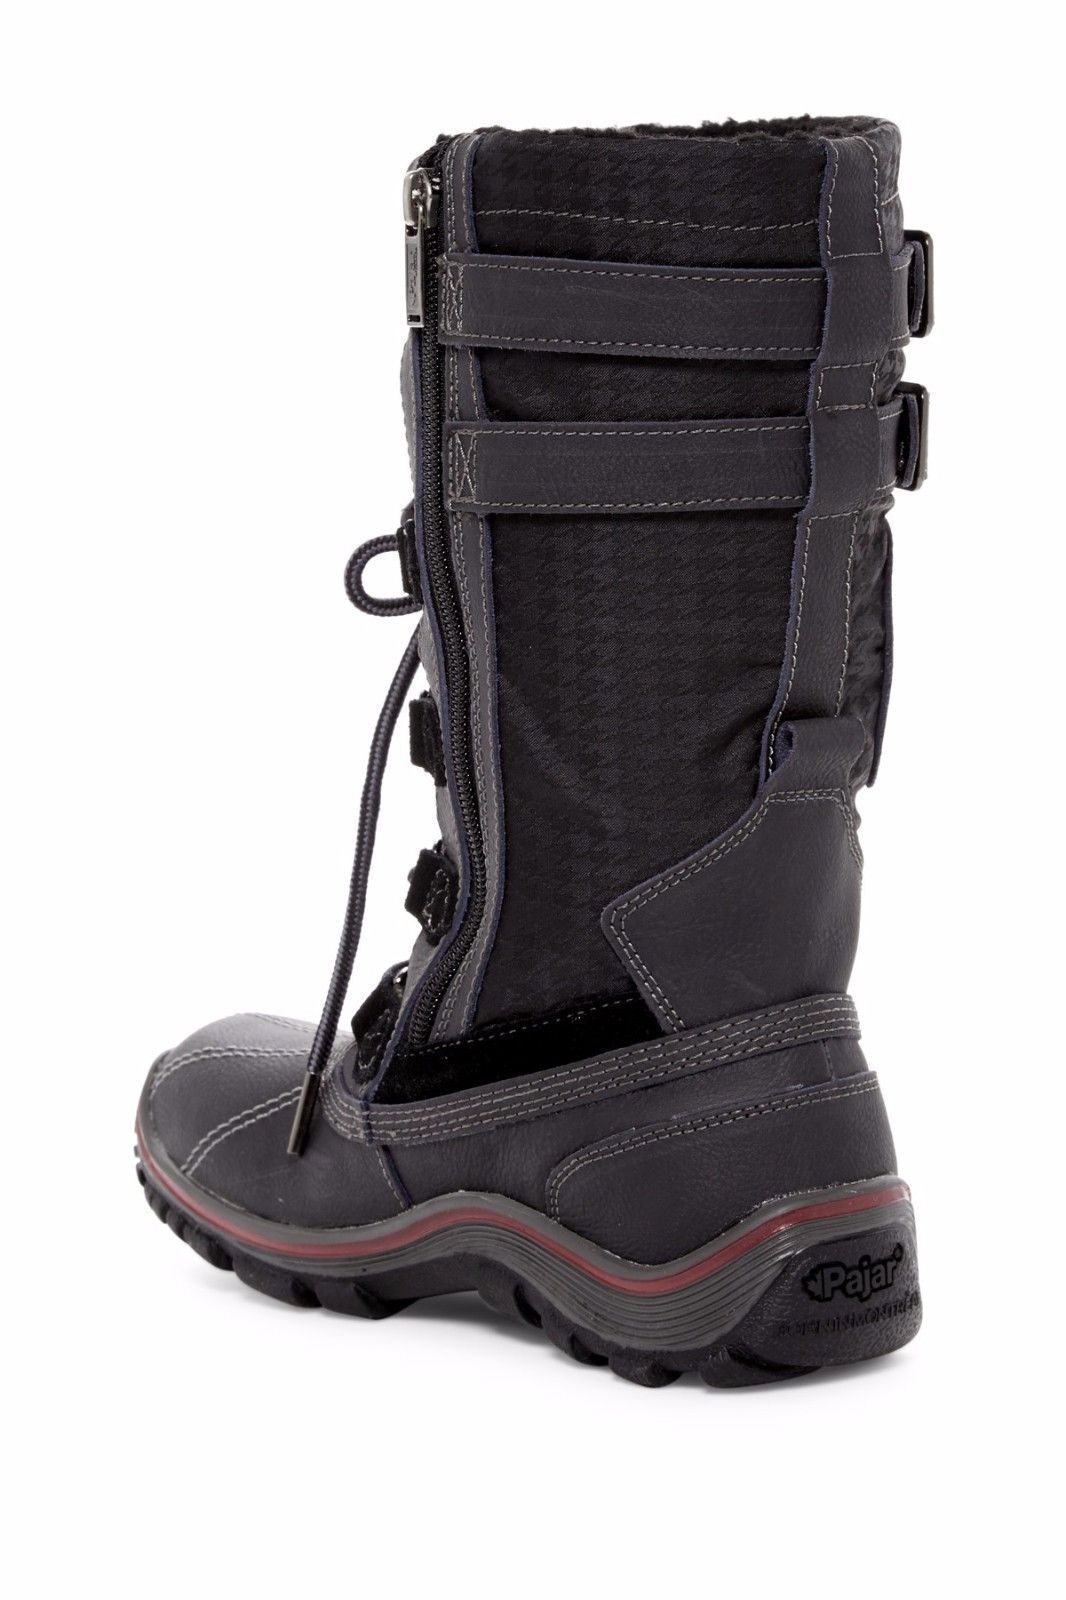 A sturdy black Pajar Adriana Women's Winter Snow Waterproof Boots Size US 5-5.5 with laces and multiple zippers designed for cold weather, standing upright against a white background.